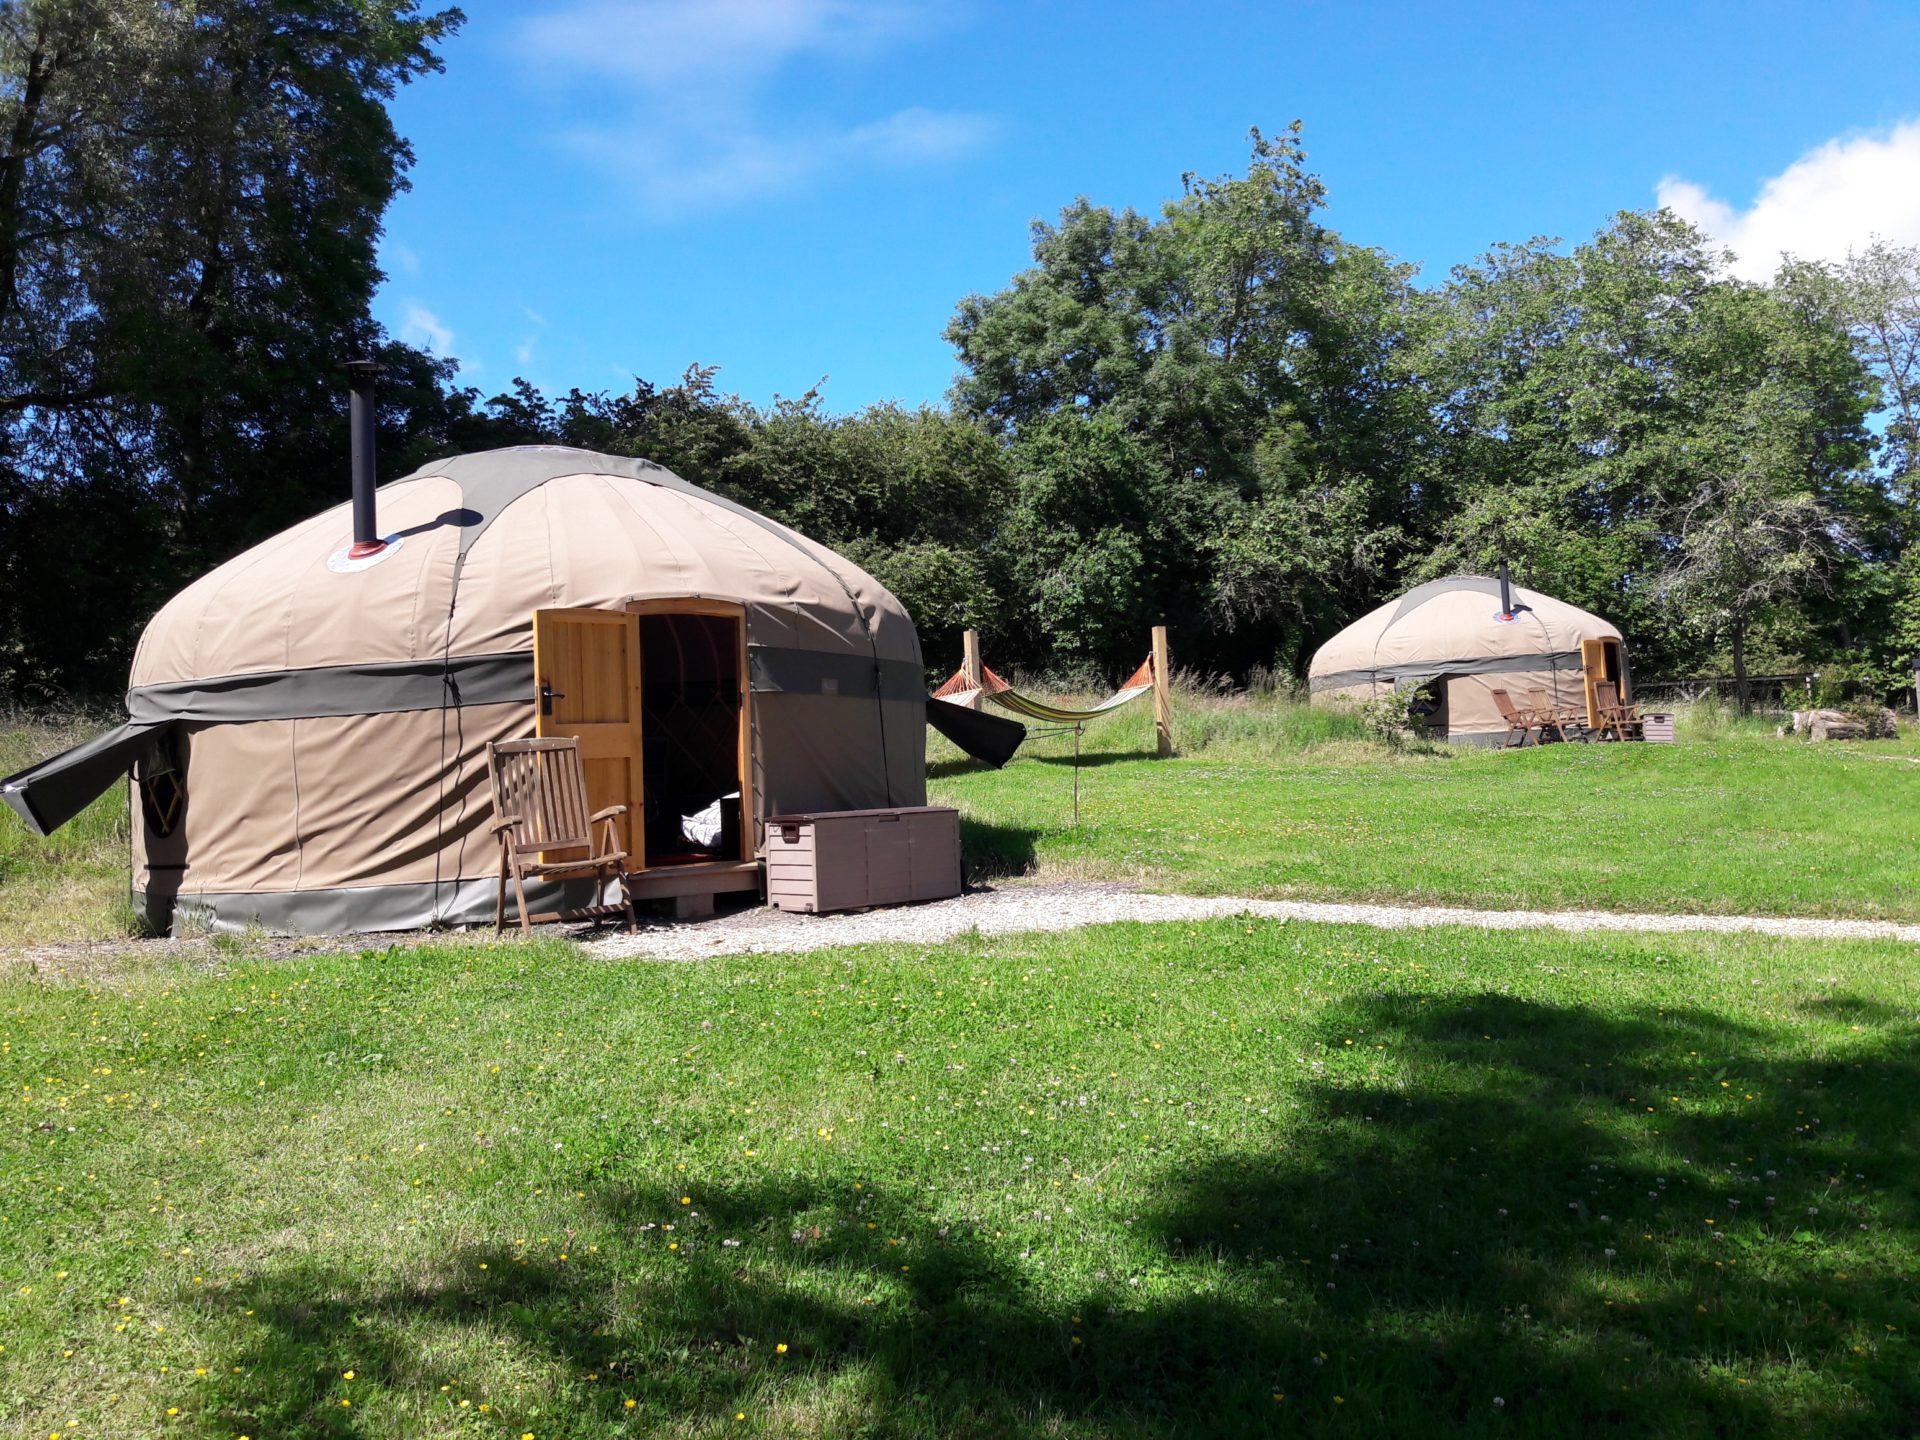 Two yurts with hammocks in between